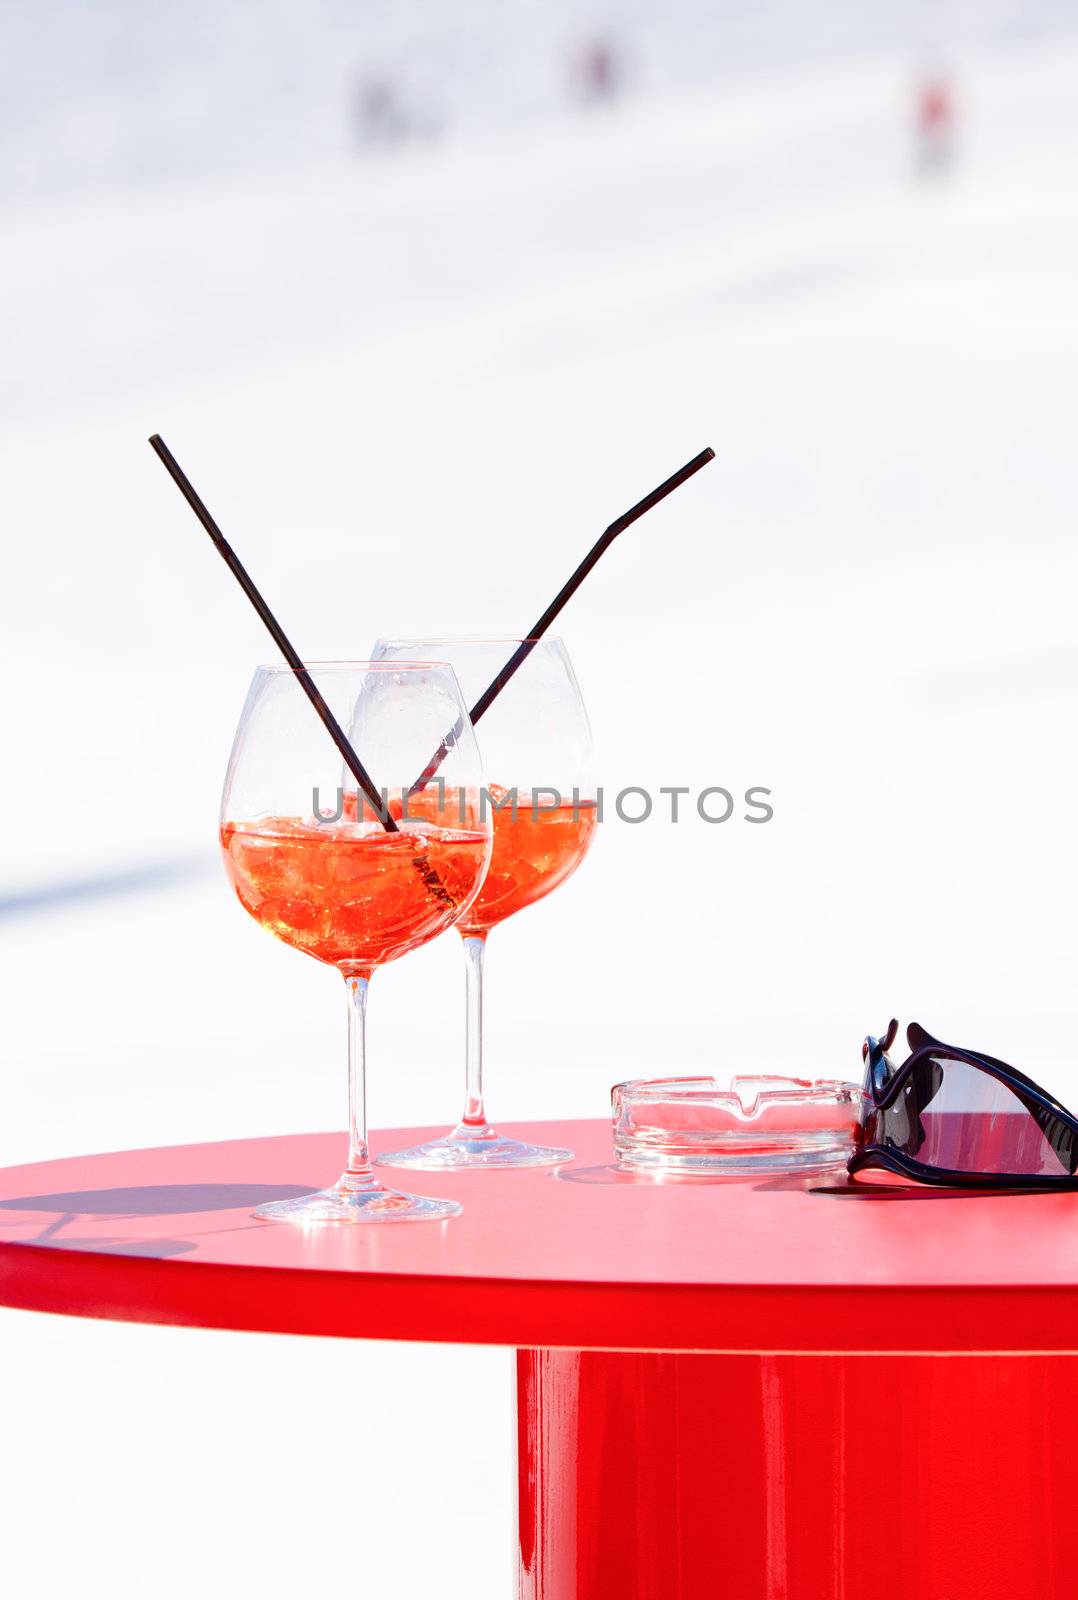 Champagne cocktails on a red table at Italian ski resort